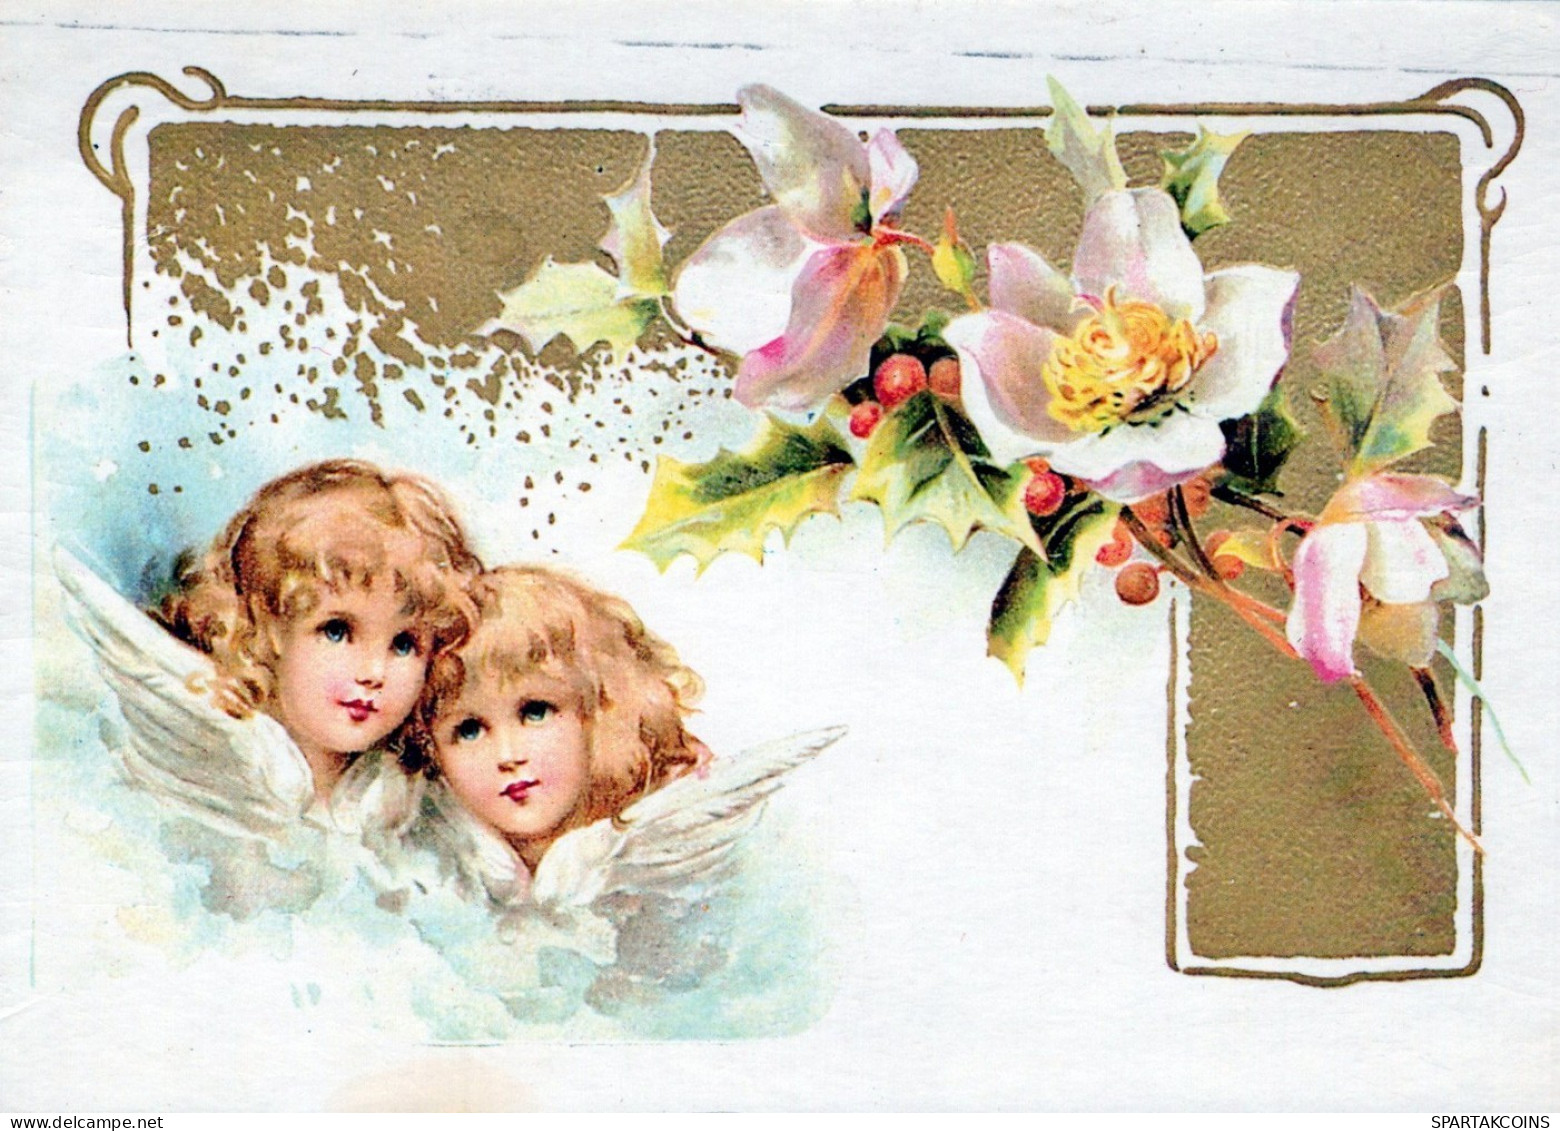 ANGELO Buon Anno Natale Vintage Cartolina CPSM #PAH019.IT - Anges